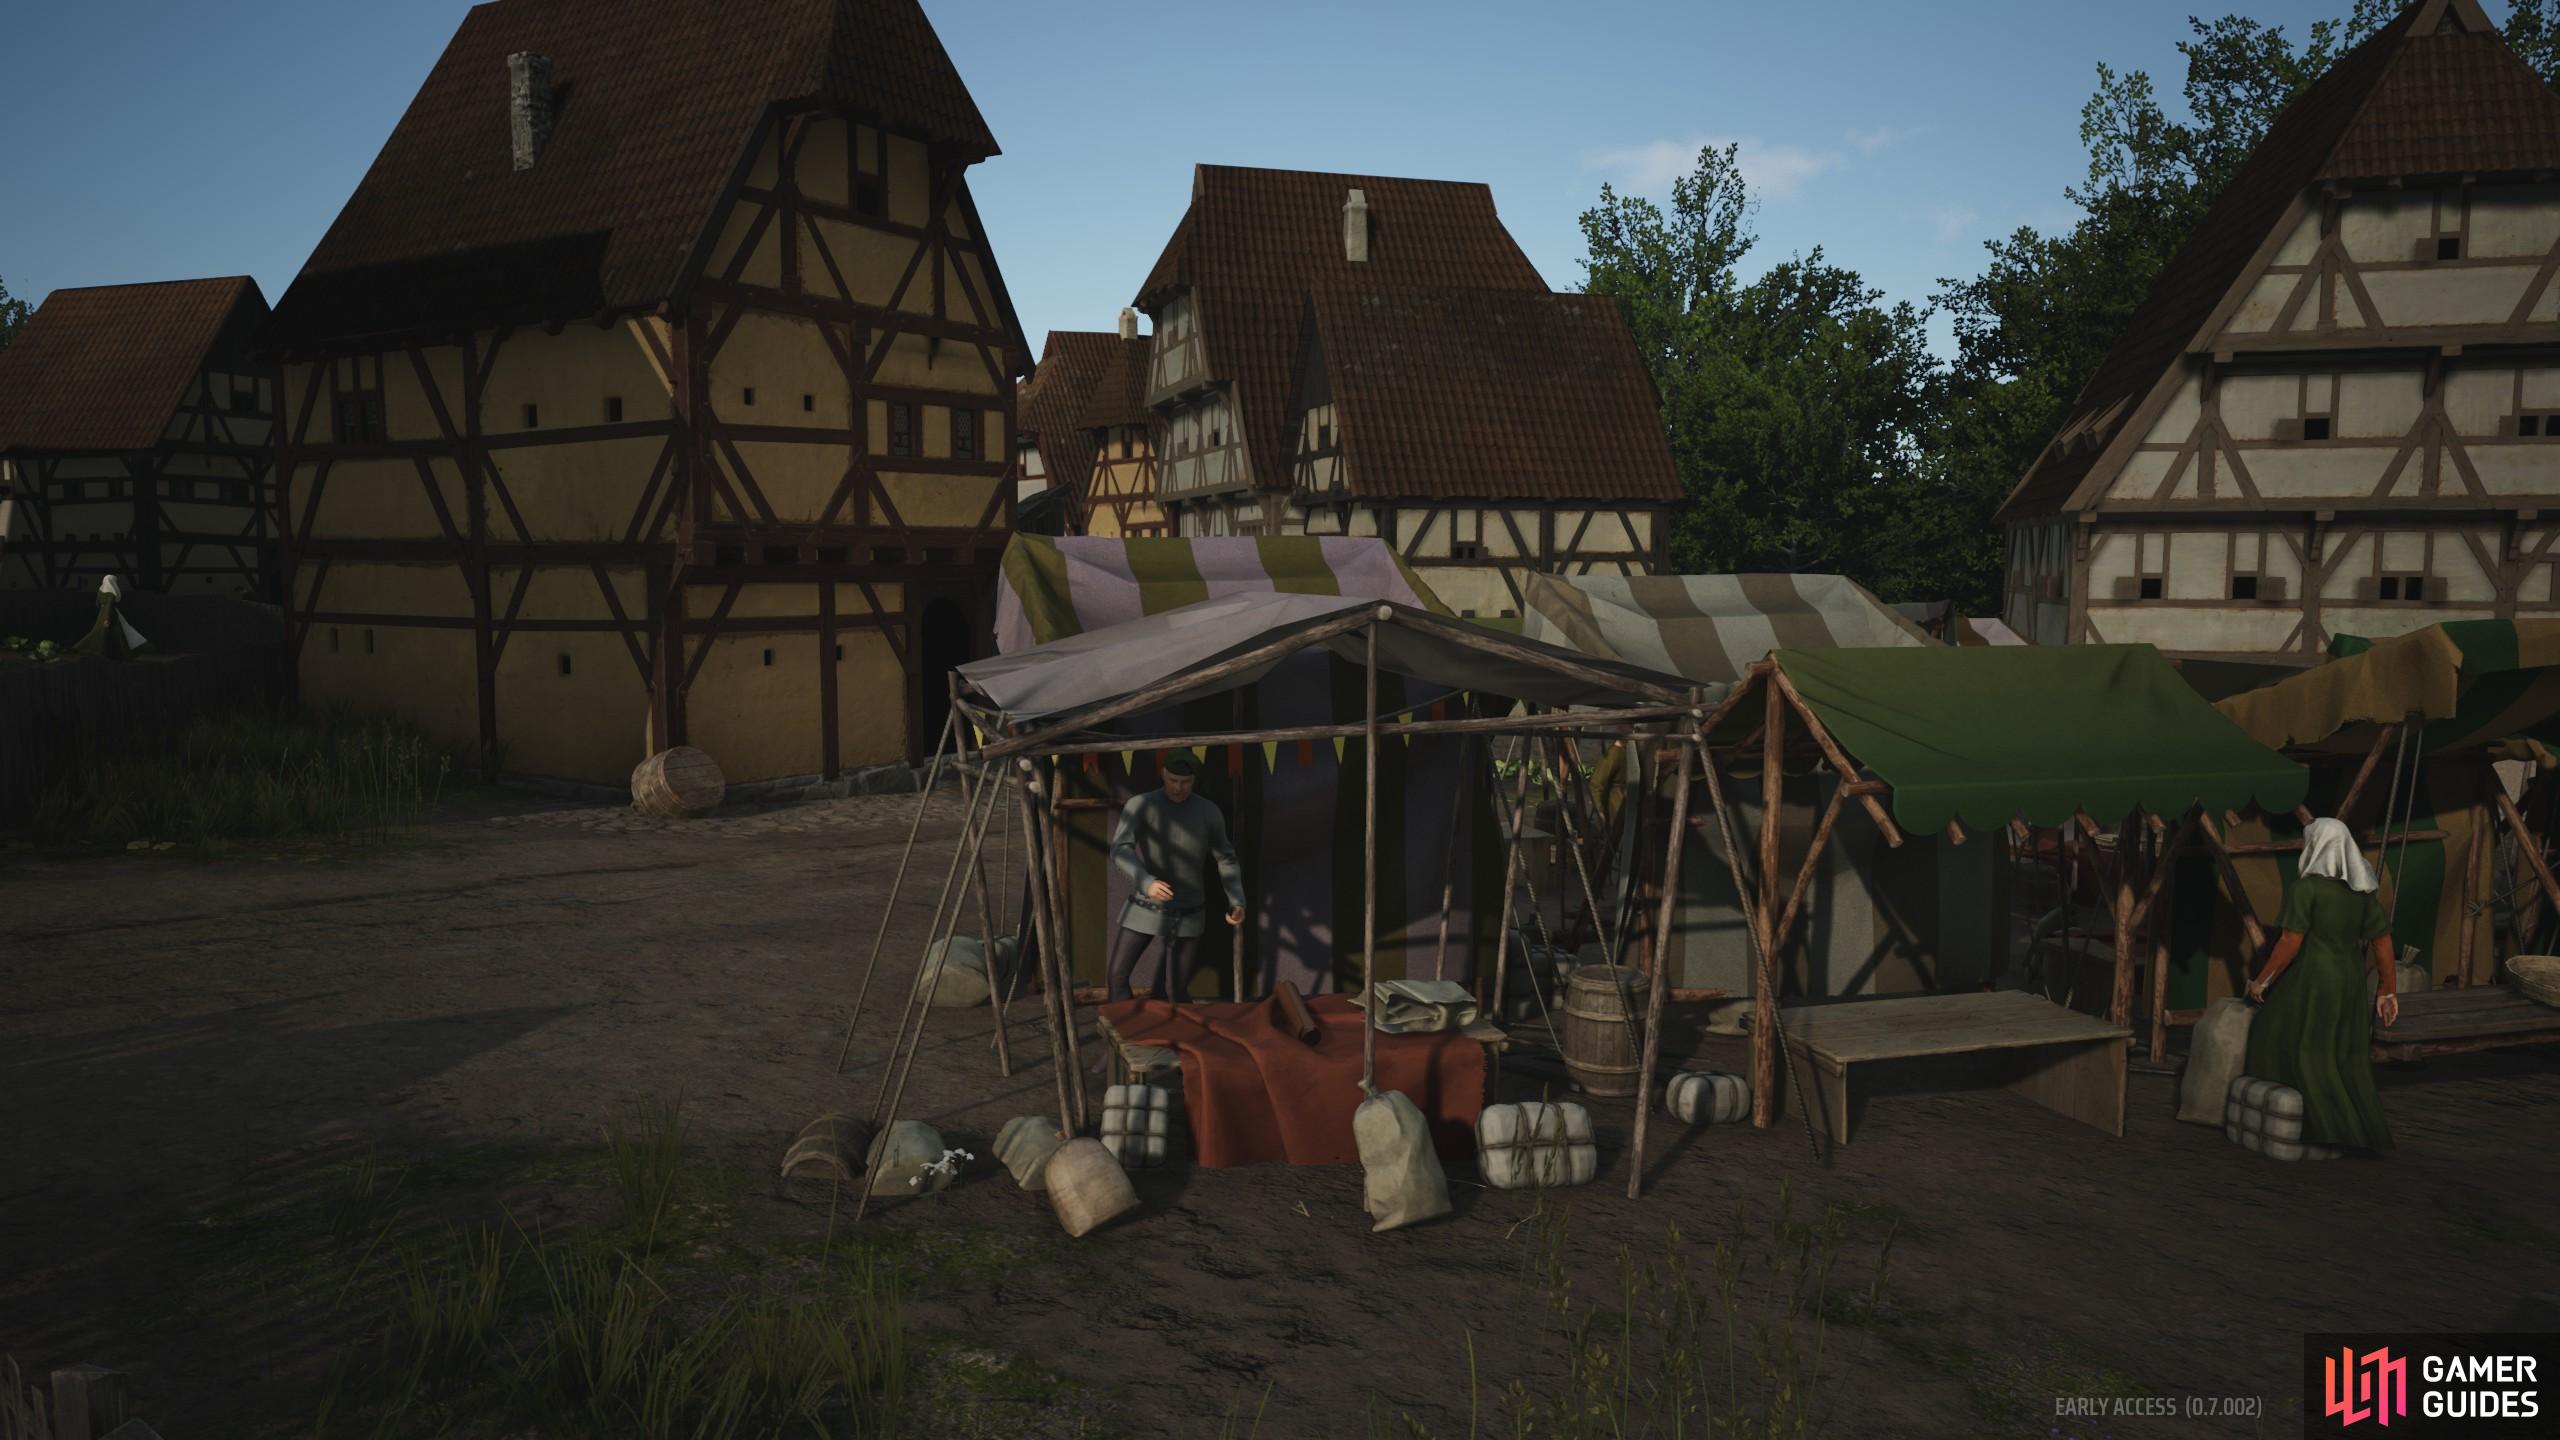 Here’s a look at the Clothing Stalls feature of Manor Lords and how to interact with them.